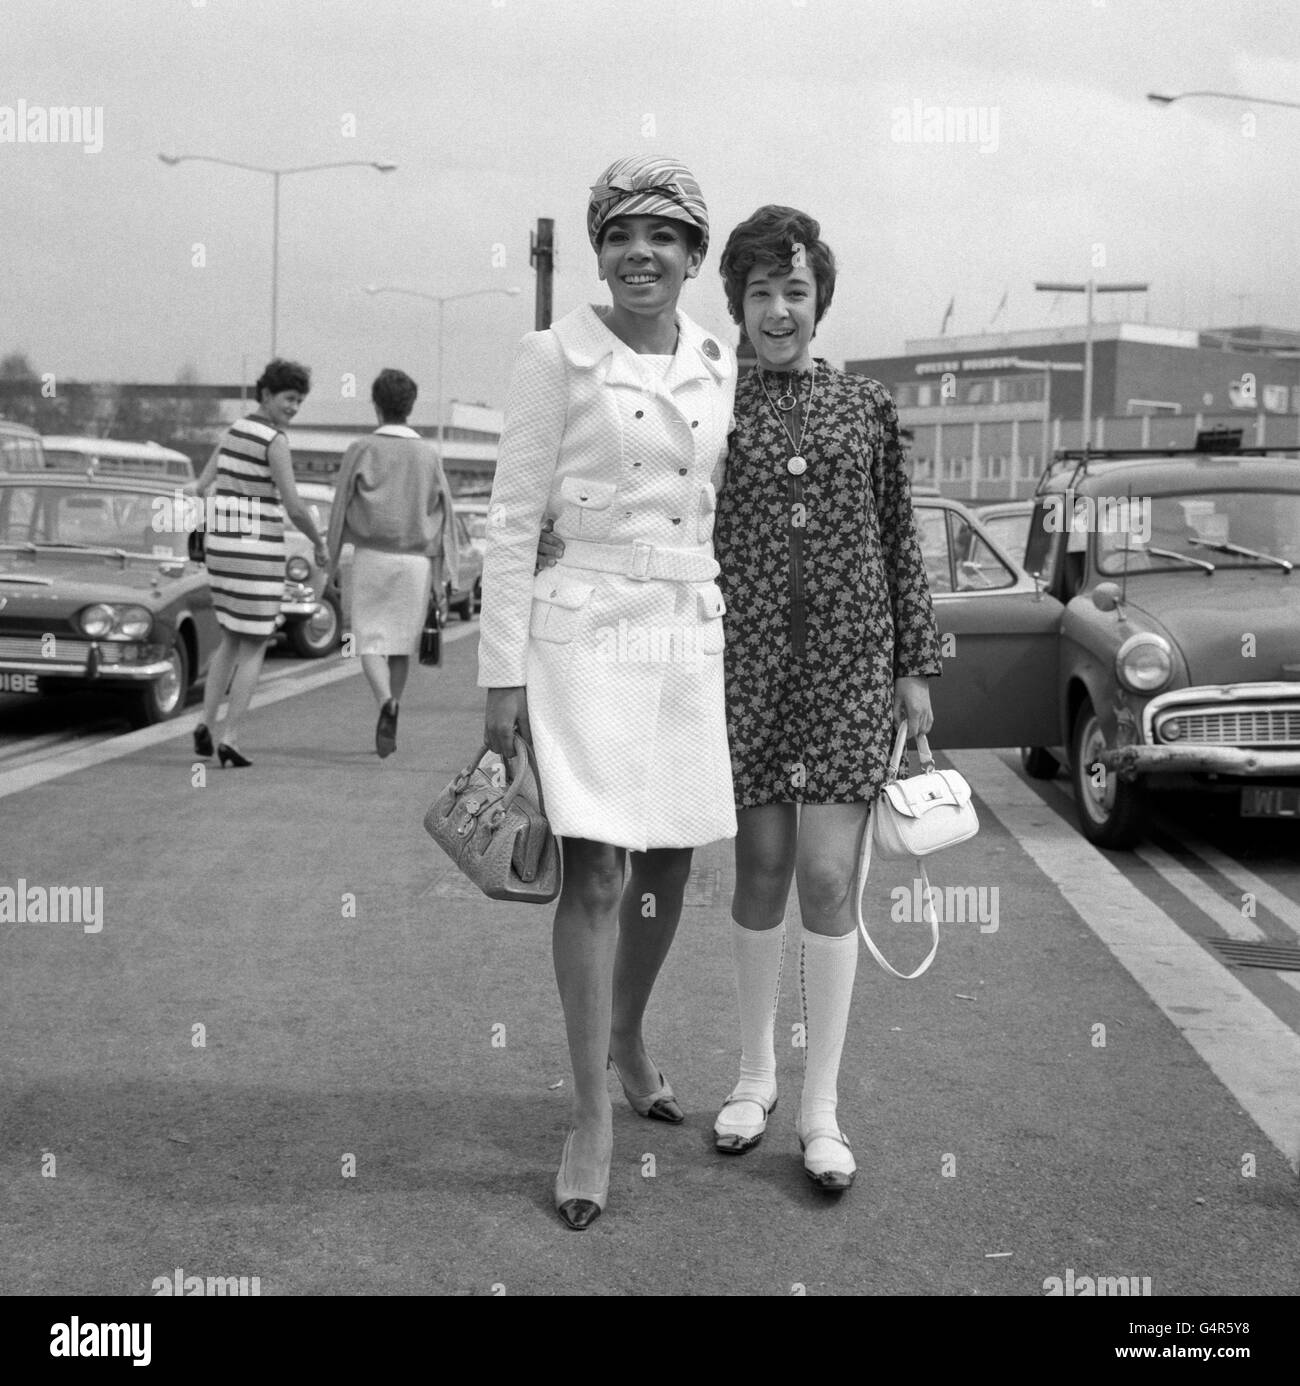 Welsh Singer Shirley Bassey pictured with daughter Sharon (12) at Heathrow Airport. They were due to board a flight to Monte Carlo to attend a gala performance, followed by a holiday in Monaco. Shirley is wearing a white coat and gay candy-striped cap. Stock Photo